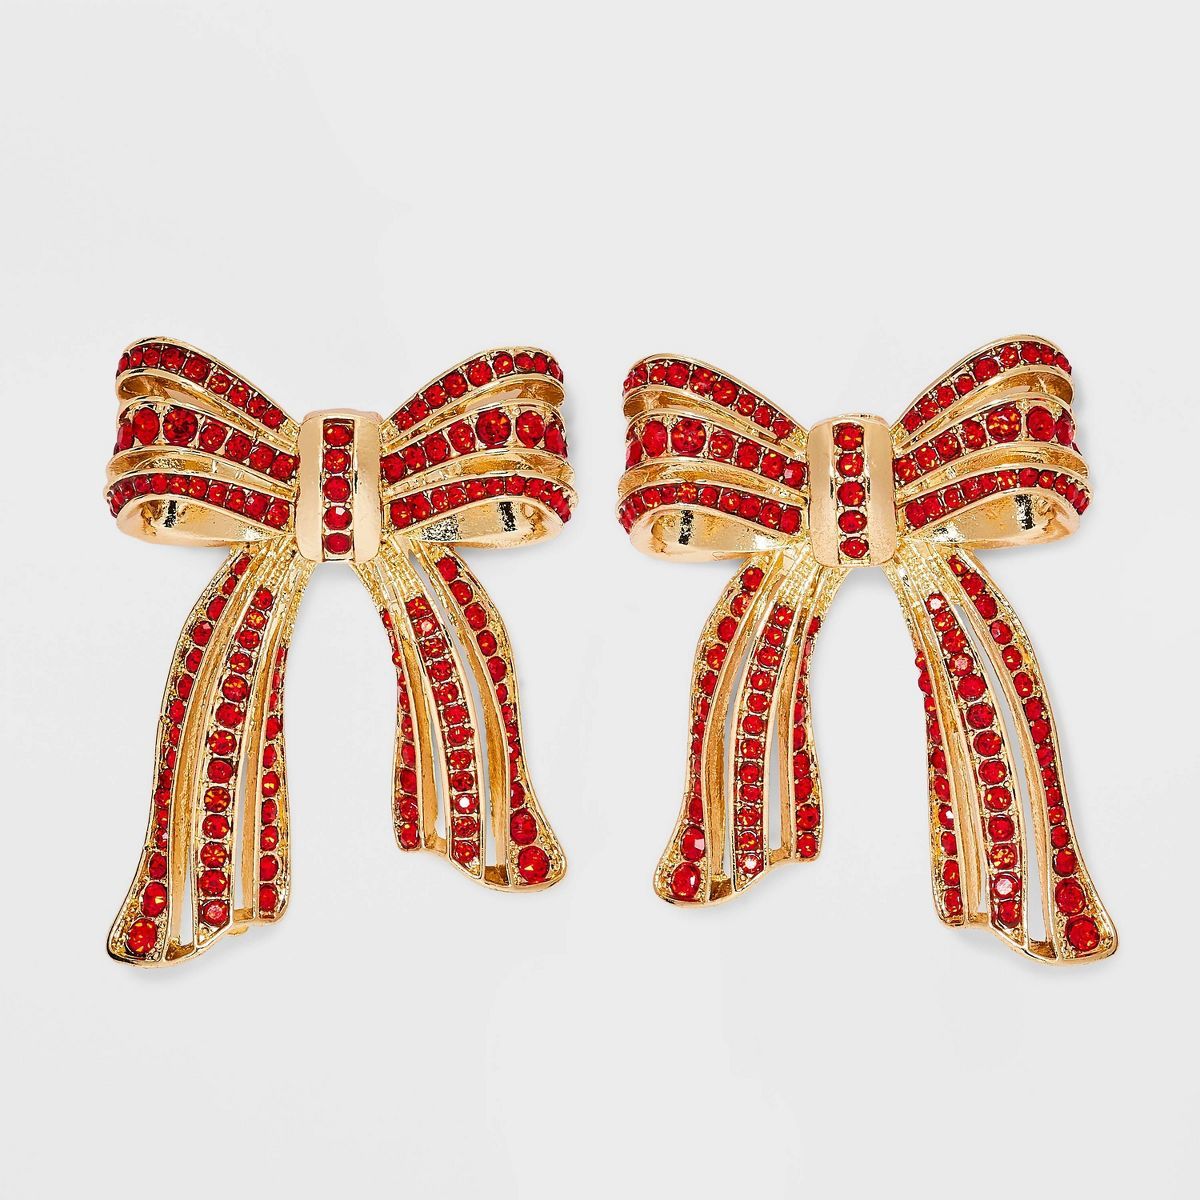 SUGARFIX by BaubleBar "Take A Bow" Statement Earrings - Gold | Target